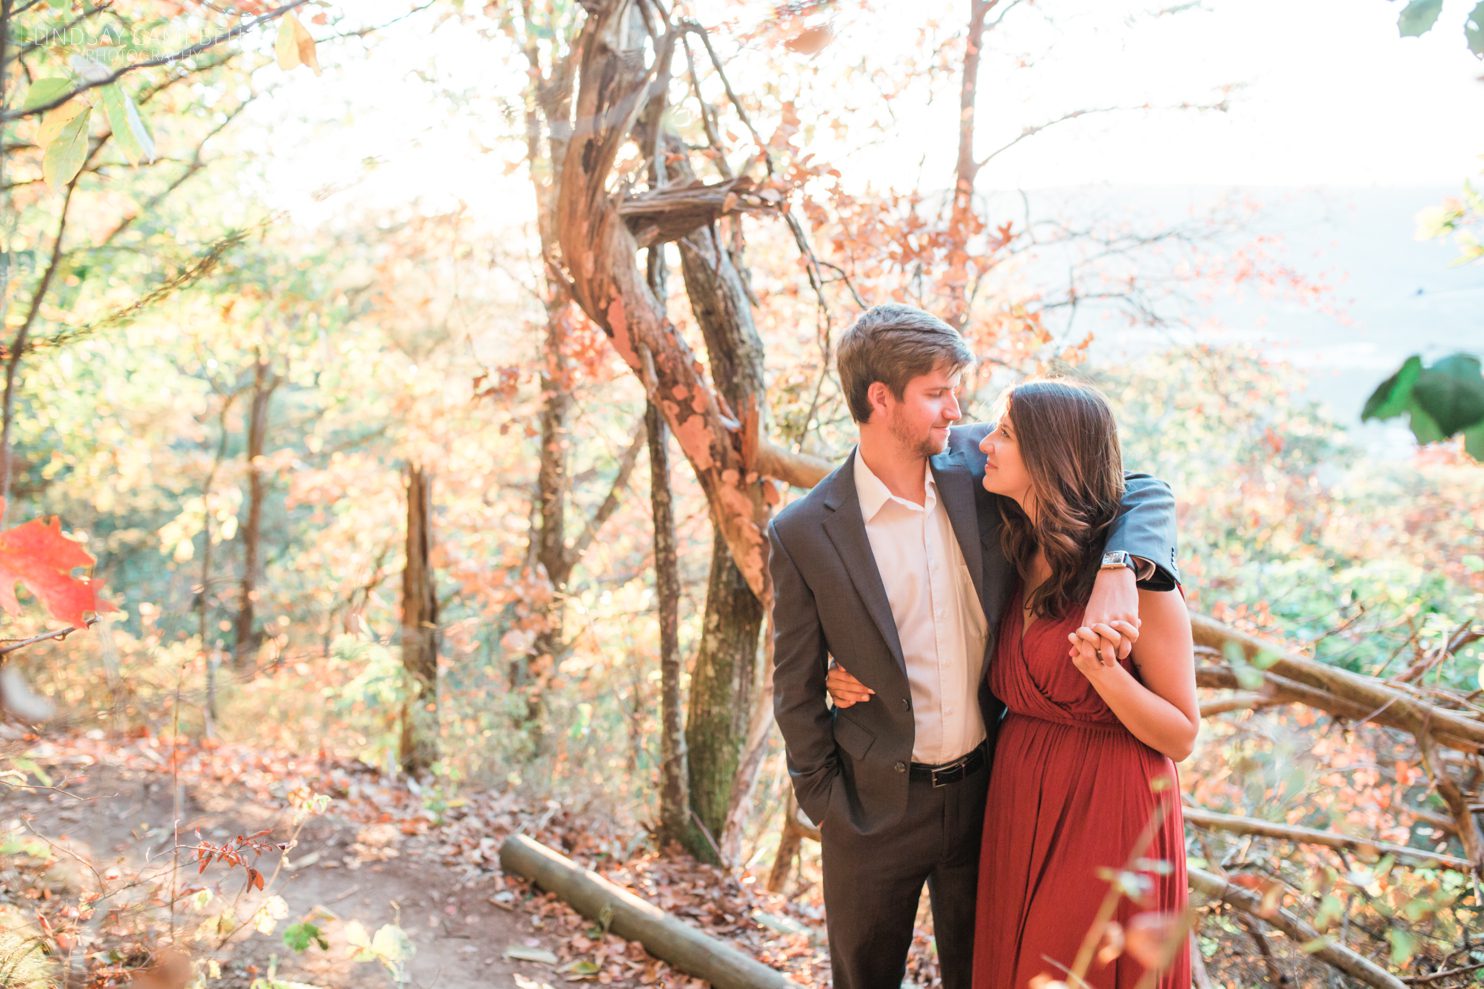 Kat-and-Tyler-Chattanooga-Engagement-Session-Lookout-Mountain-Engagement-photos-chattanooga-wedding-photographer_0035 Kat + Tyler Chattanooga Lifestyle Engagement Session